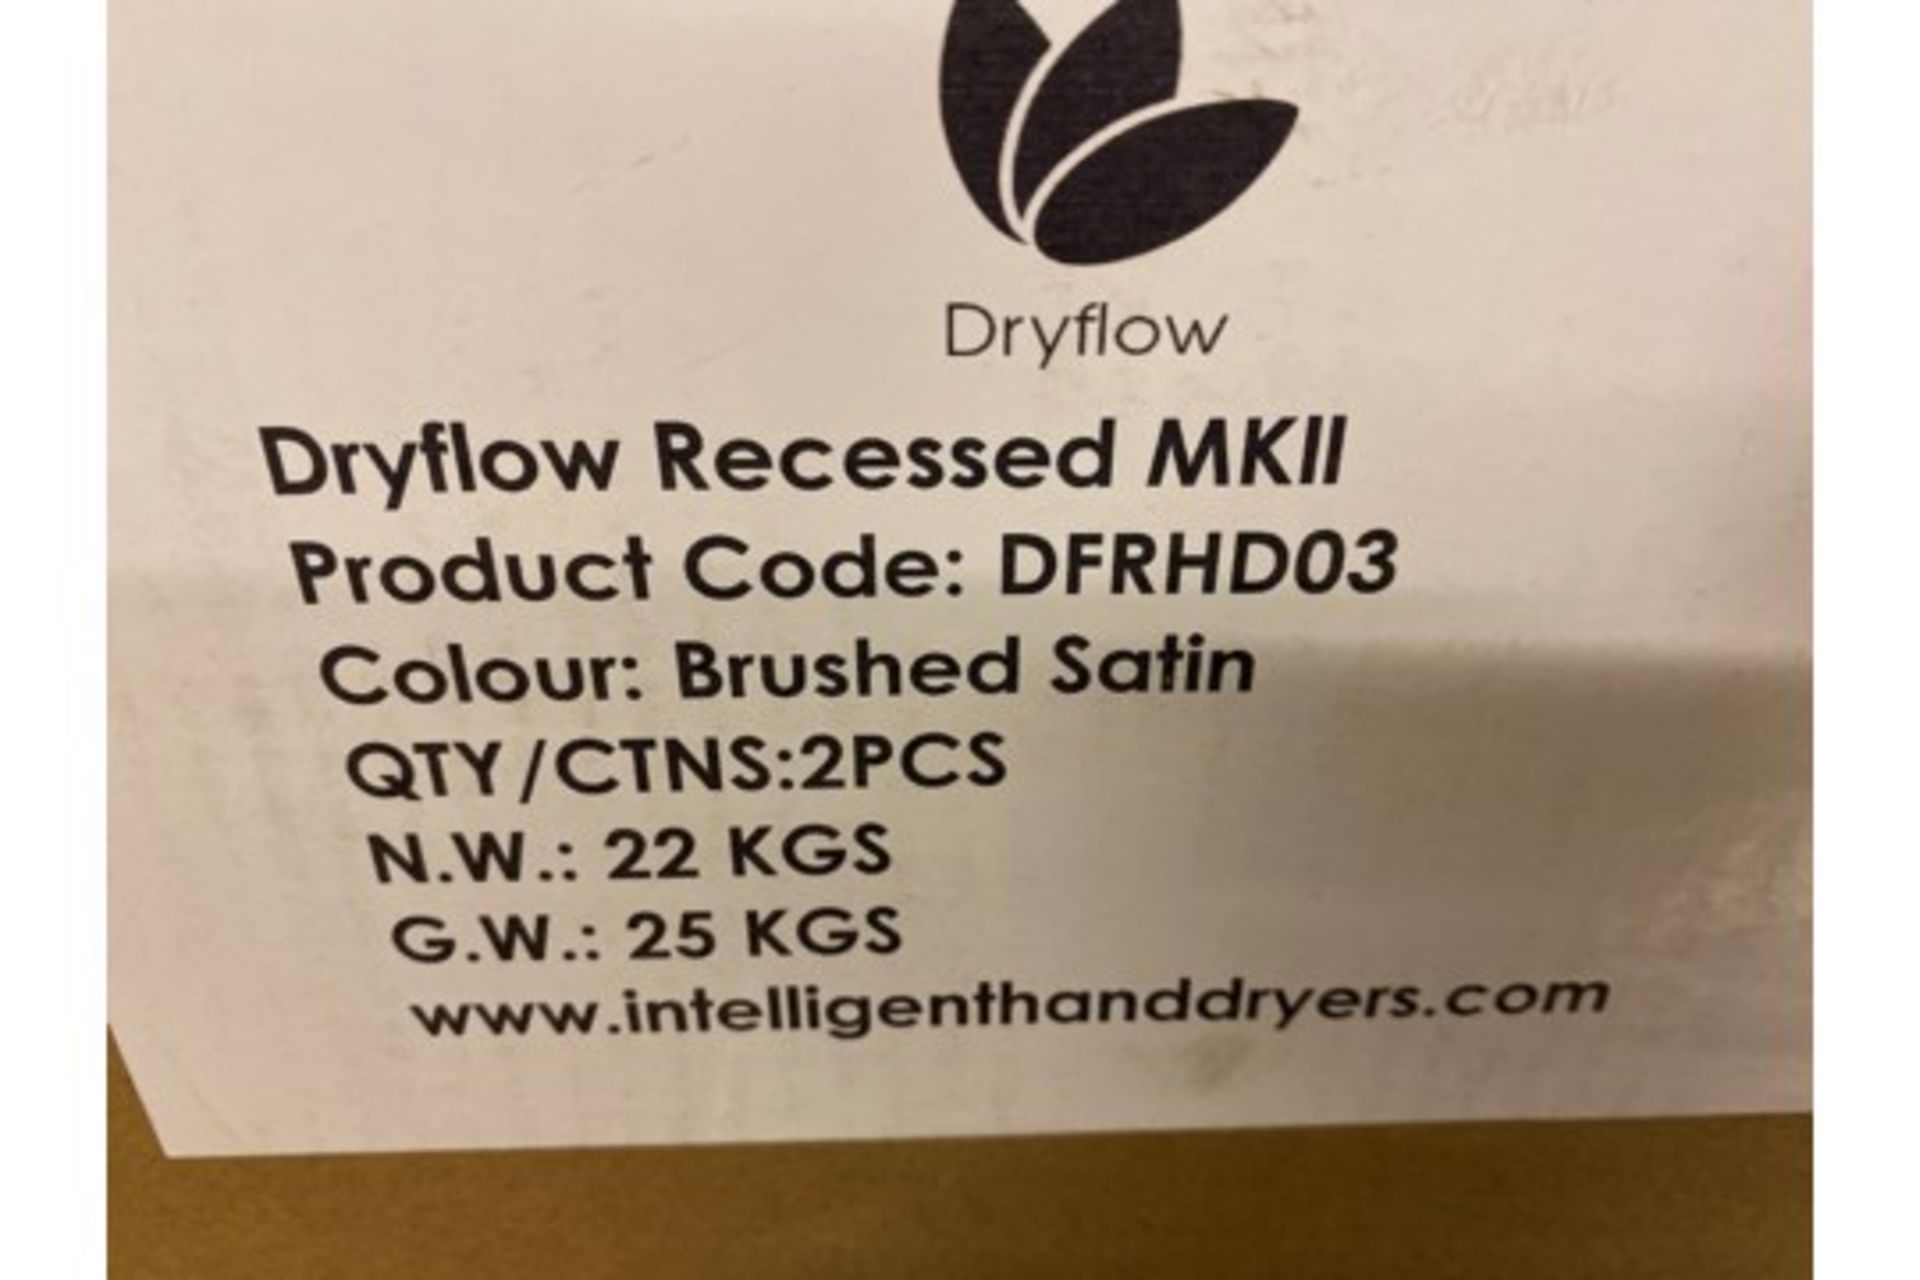 Boxed Dryflow Recessed MK11 Electric Hand Dryer - Image 2 of 5